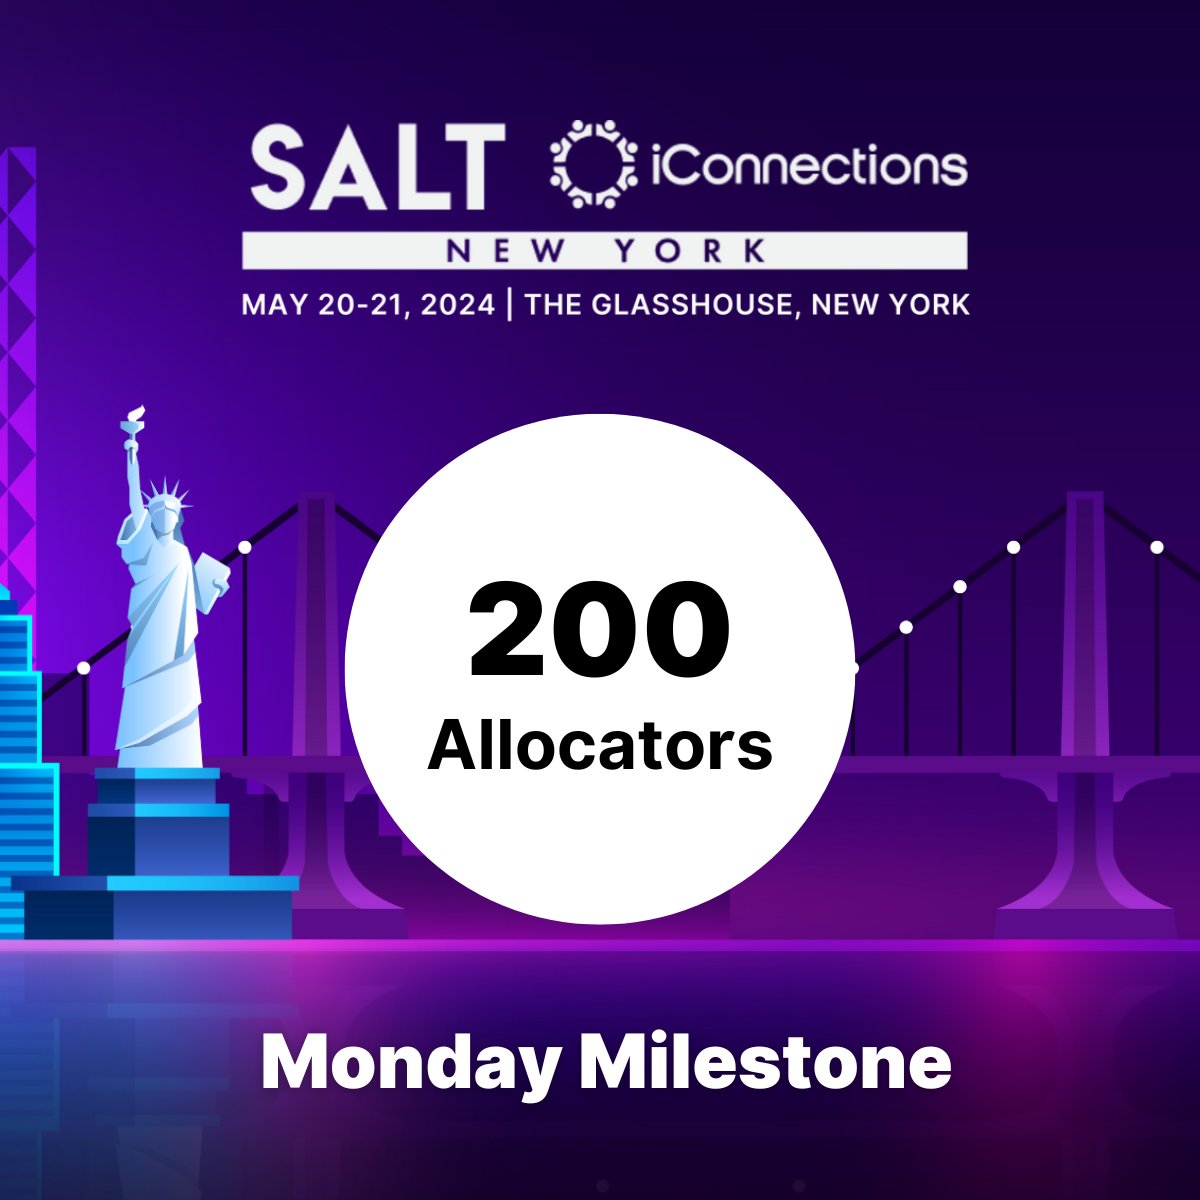 🎉 Monday Milestone | @SALTConference iConnections New York 2024: 200 Allocators Confirmed!

We're eager to announce that over 200 allocators from across the industry have already registered for SALT iConnections New York 2024.🌎
 
#SALTiConnectionsNY2024 #AltInvesting